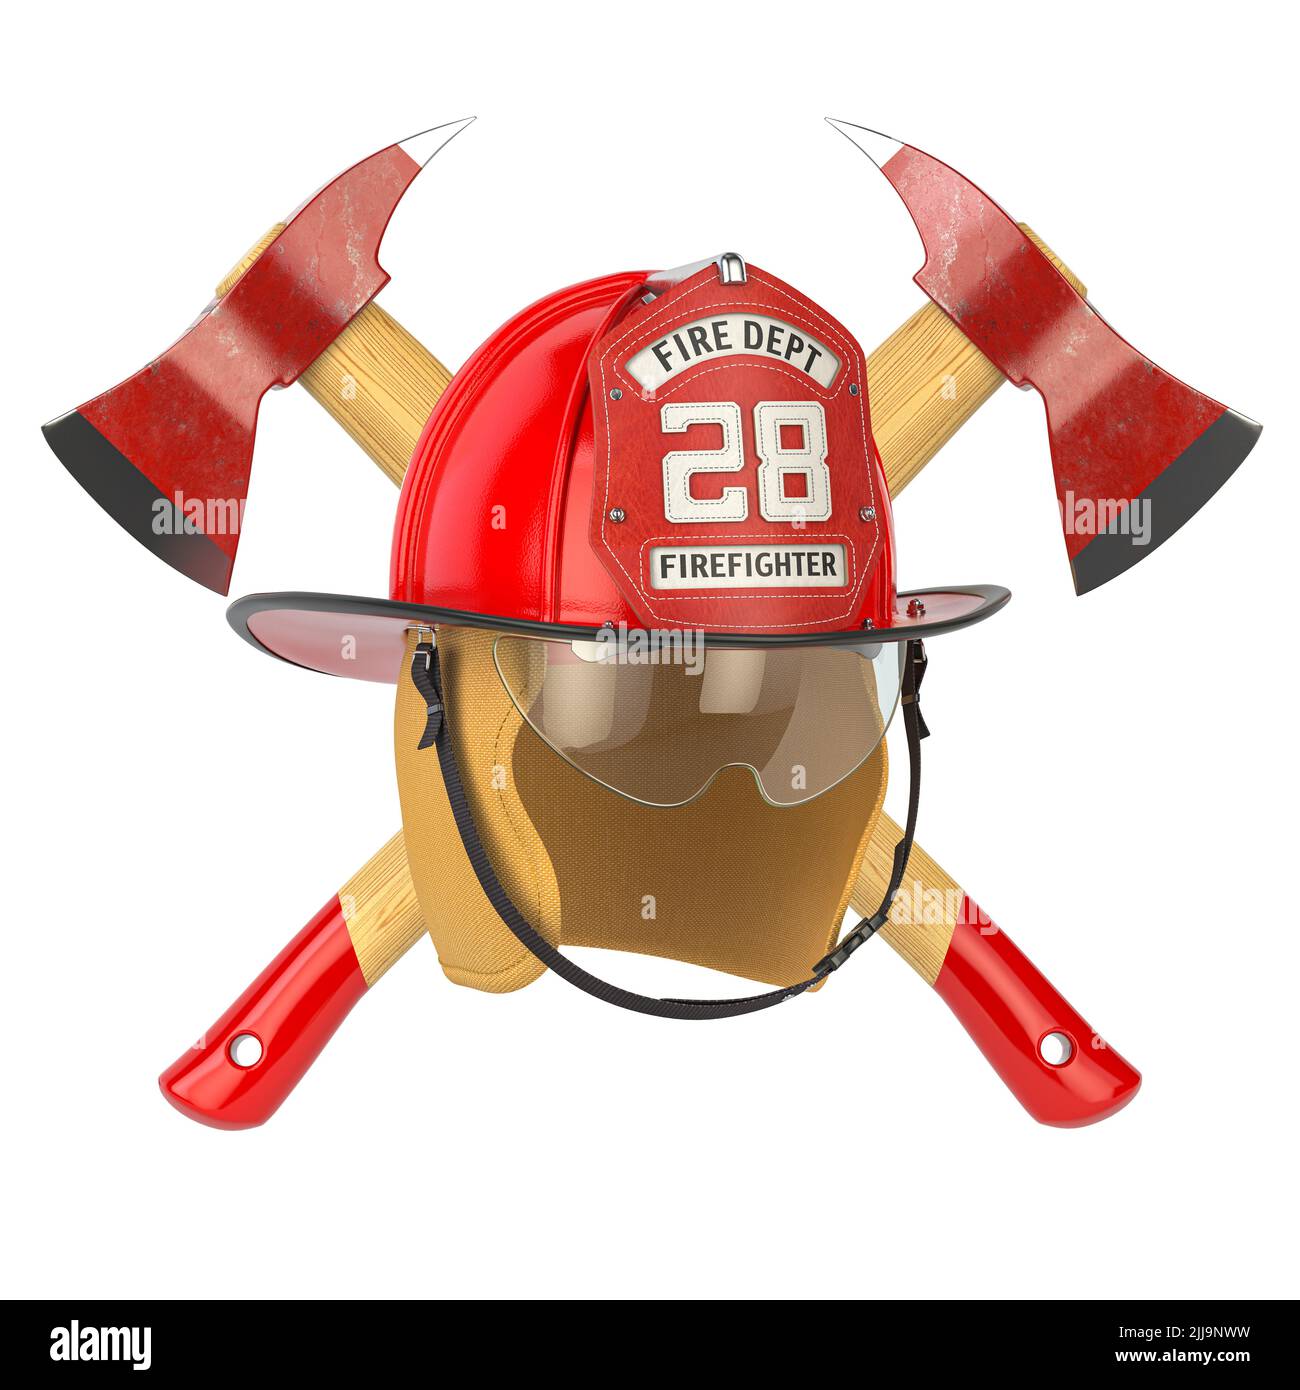 Fire Deprtment Emblem. Firefighter badge on a helmet with fire extinguisher and axe. 3d illustration Stock Photo